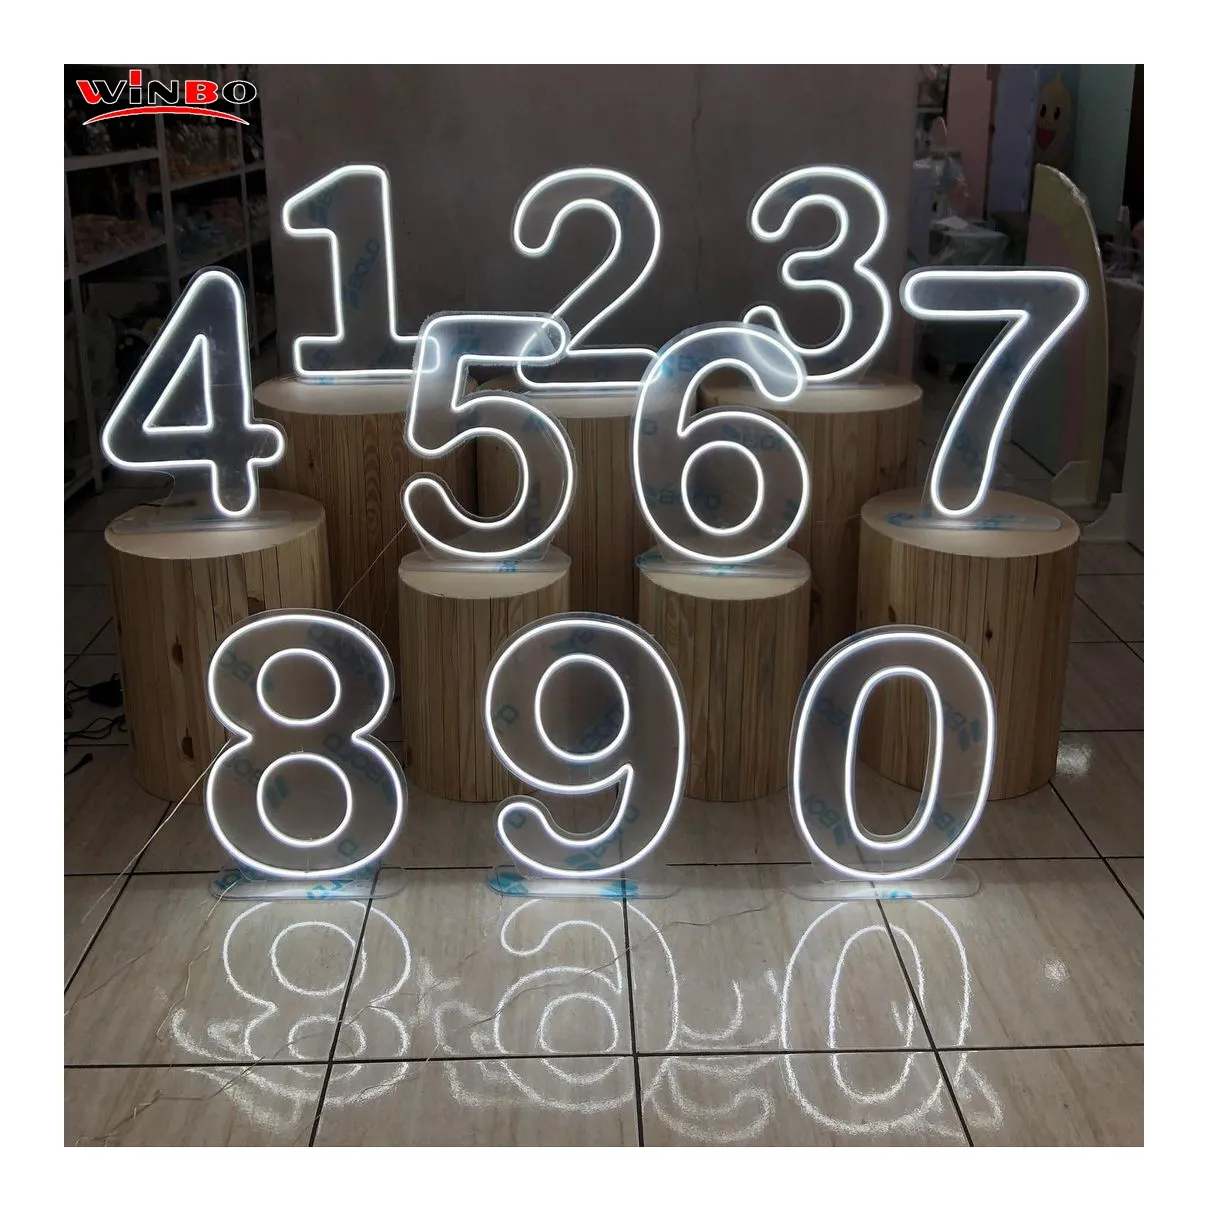 Winbo Manufacturer Customized indoor Neon made wall Waterproof Neon Numbers Sign Led Light Up lights Letters